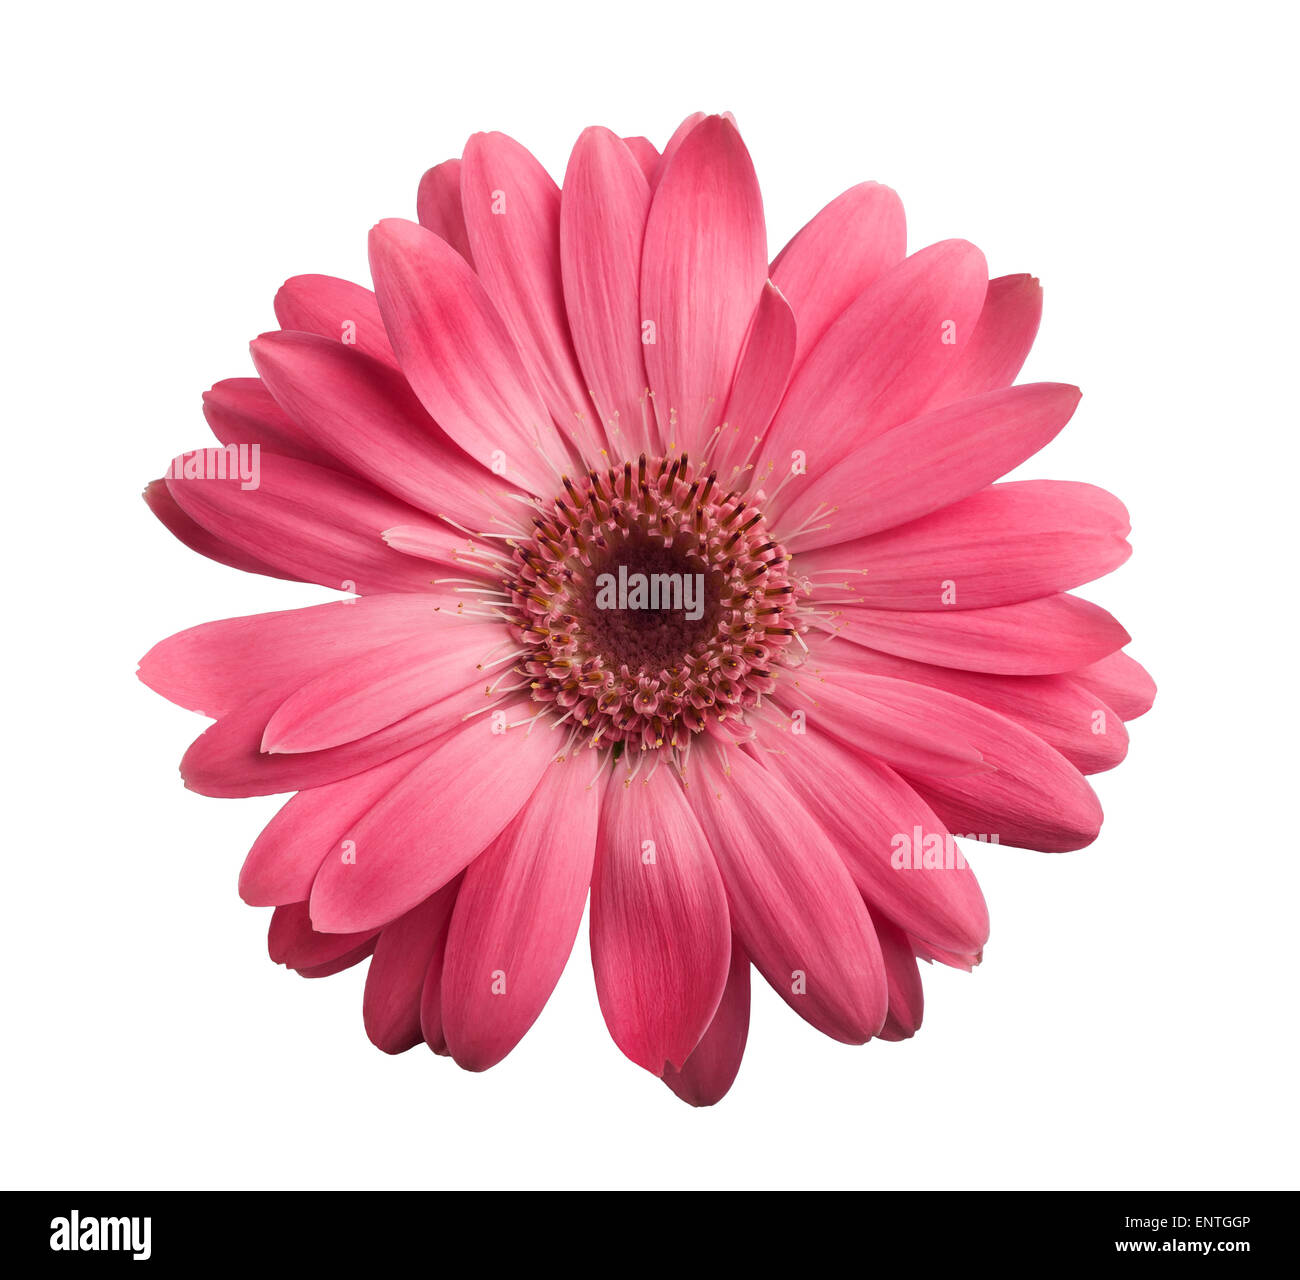 Pink gerbera daisy isolated on white Stock Photo